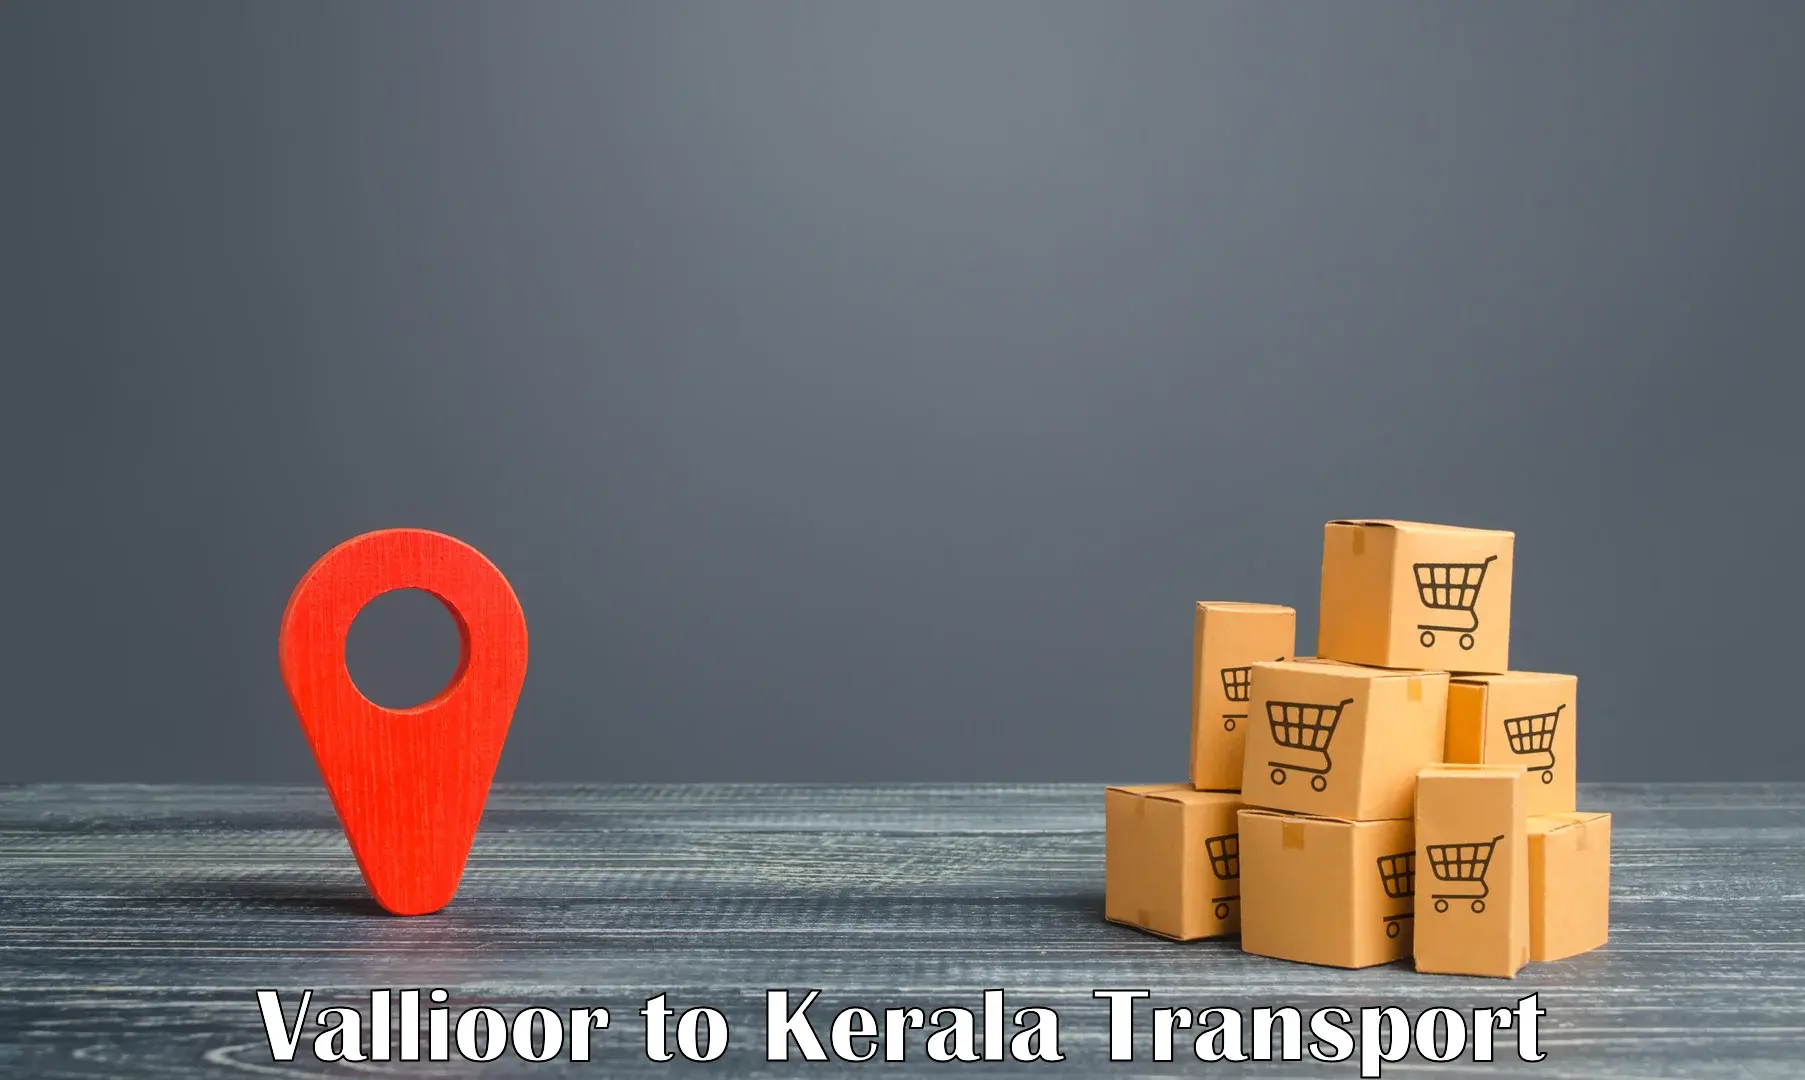 Truck transport companies in India Vallioor to Angamaly